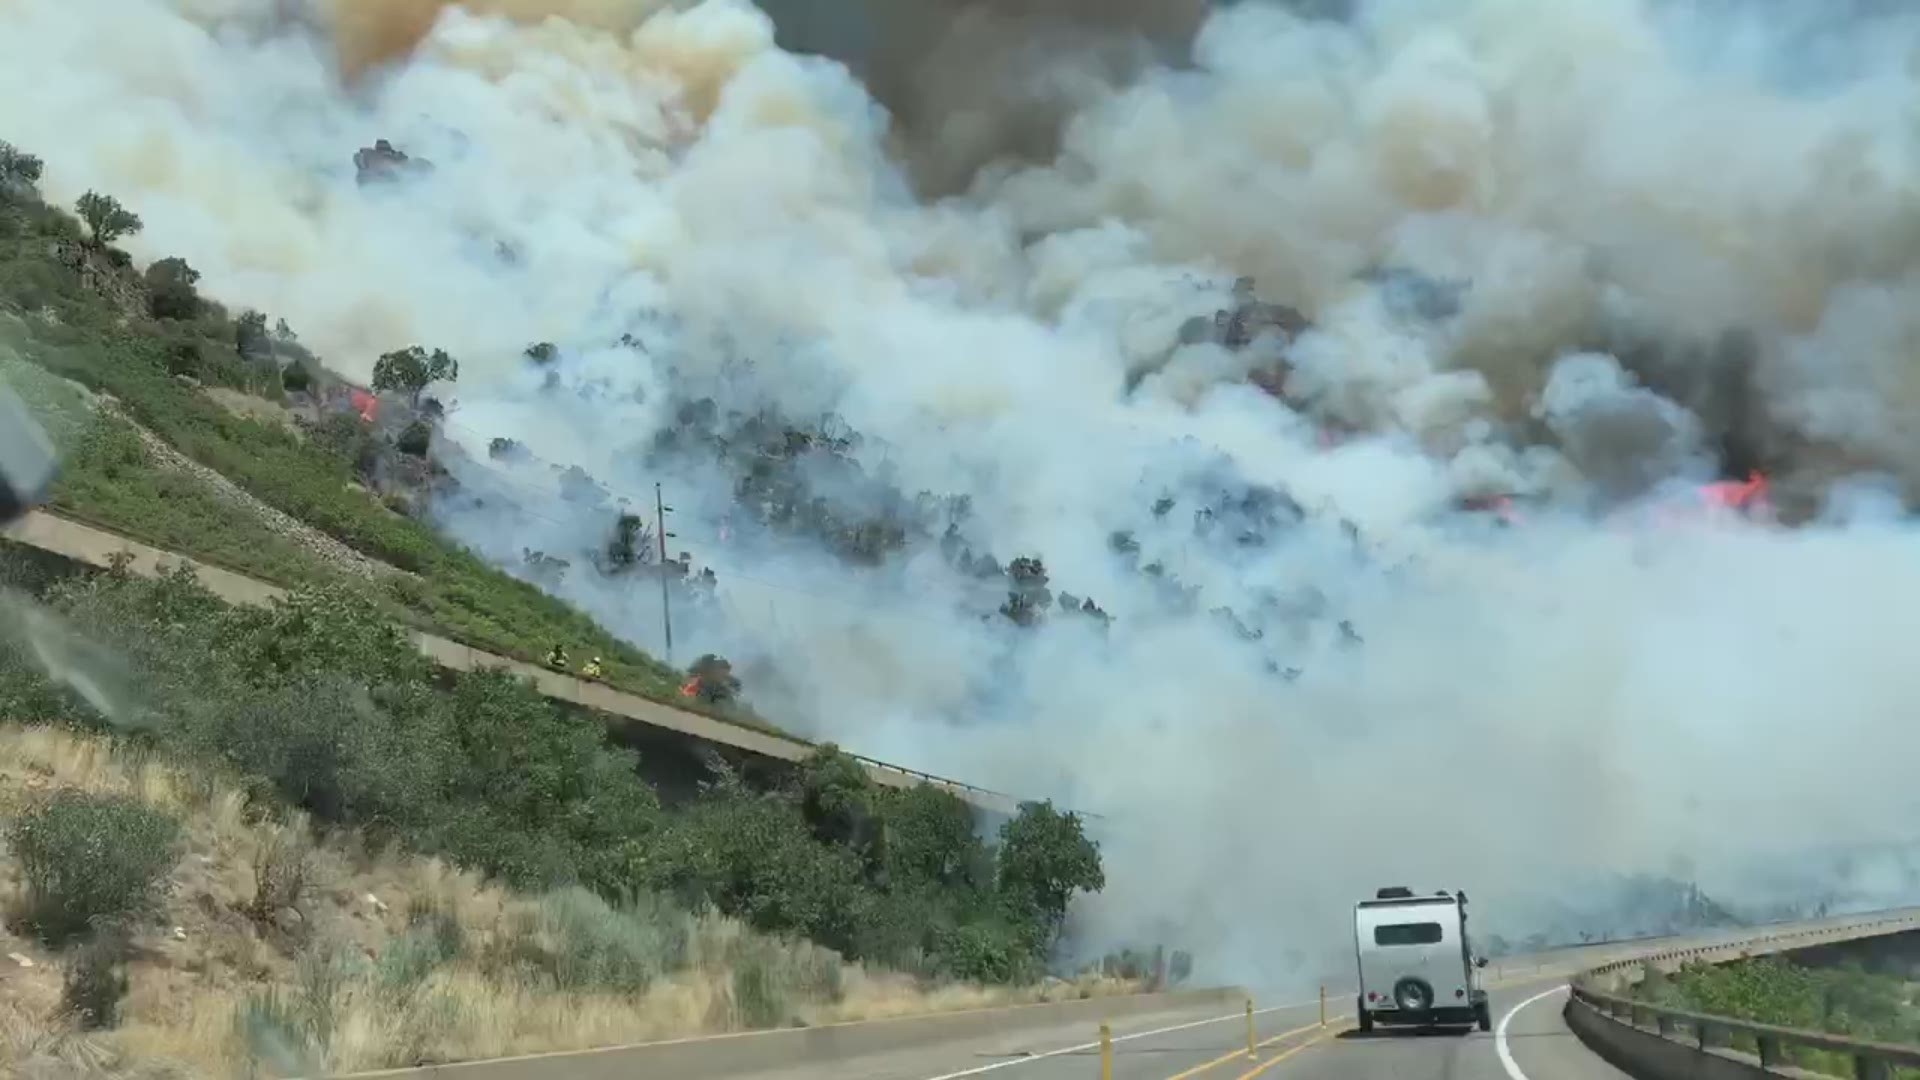 The fire was first reported at around 1:30 p.m. Monday and had grown to around 150 acres by 3 p.m.